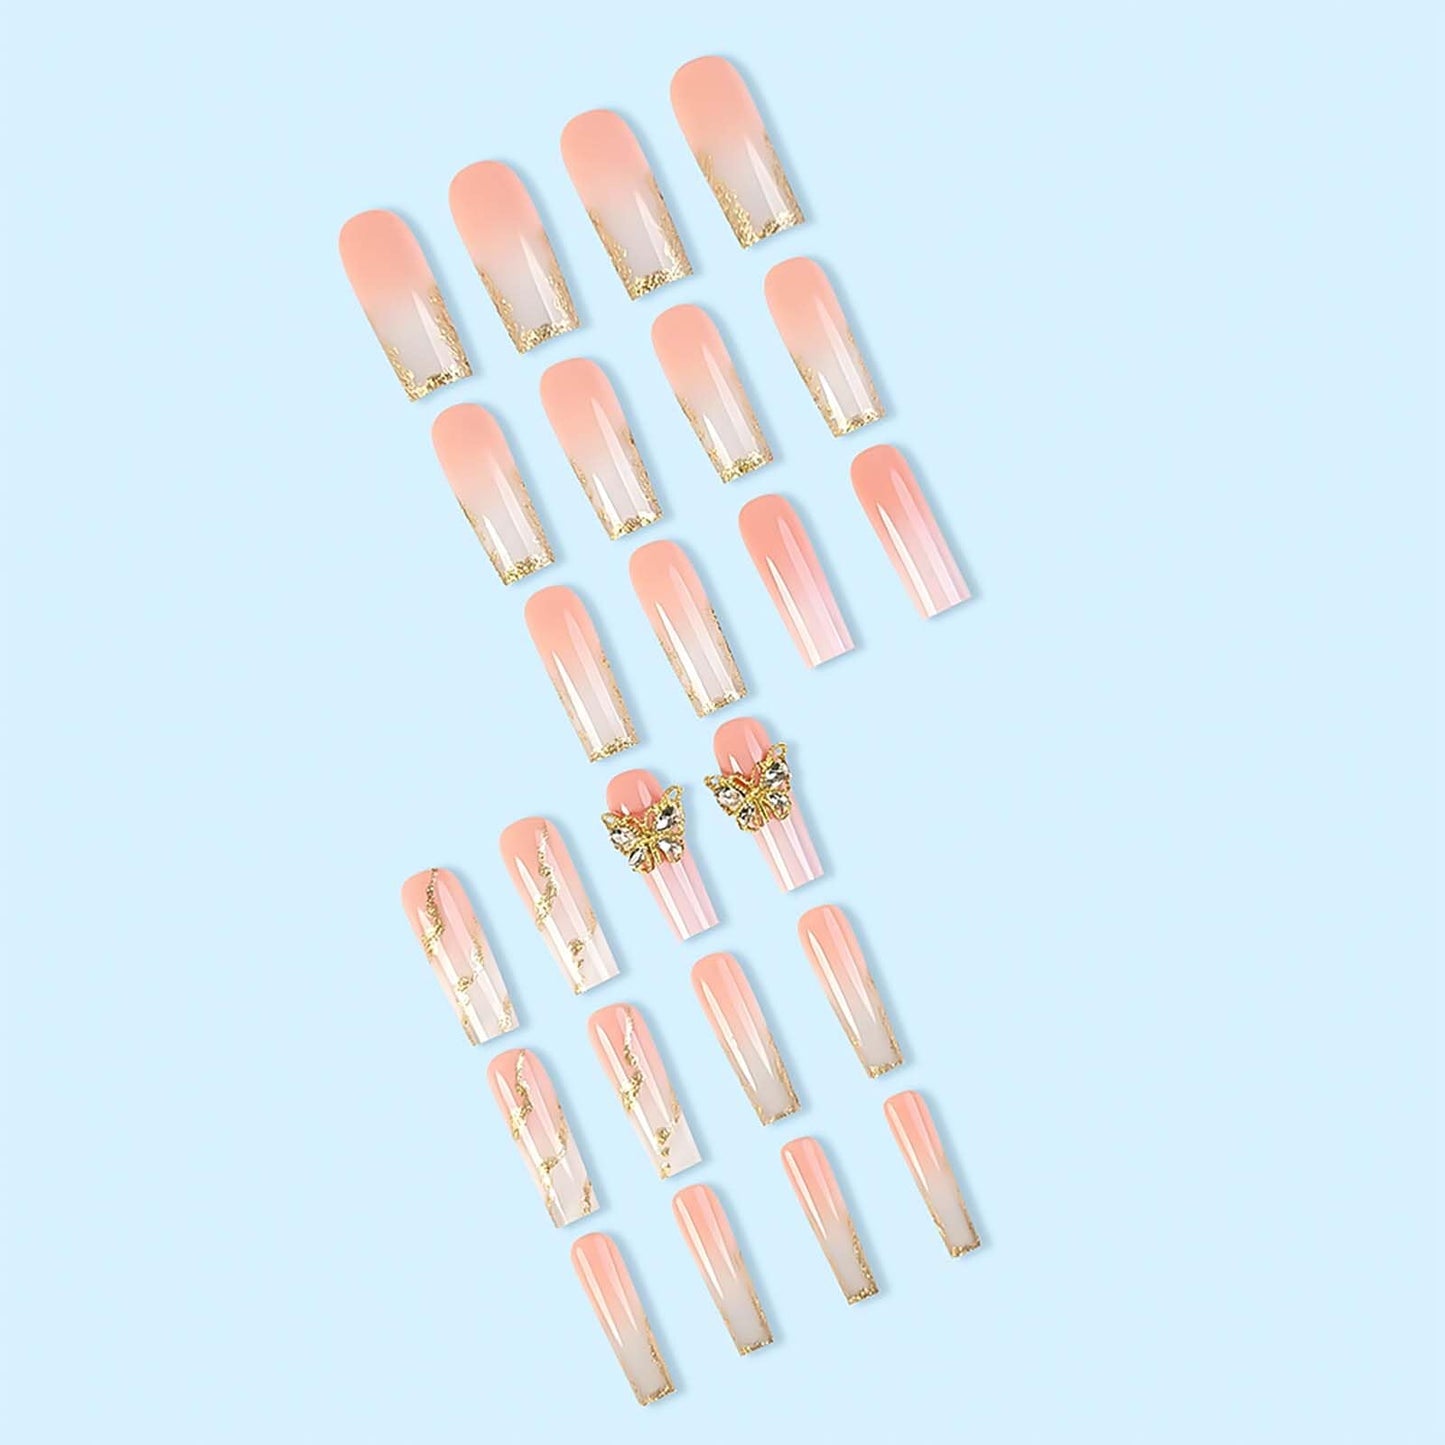 RUOKEXIN Nail Press ons Long Press on Nails Coffin Fake Fingernails Glossy Ombre Acrylic False Nails with 3D Butterfly Designs Gold Glitter Powder Artificial Nails Stick on Nails for Women 24Pcs